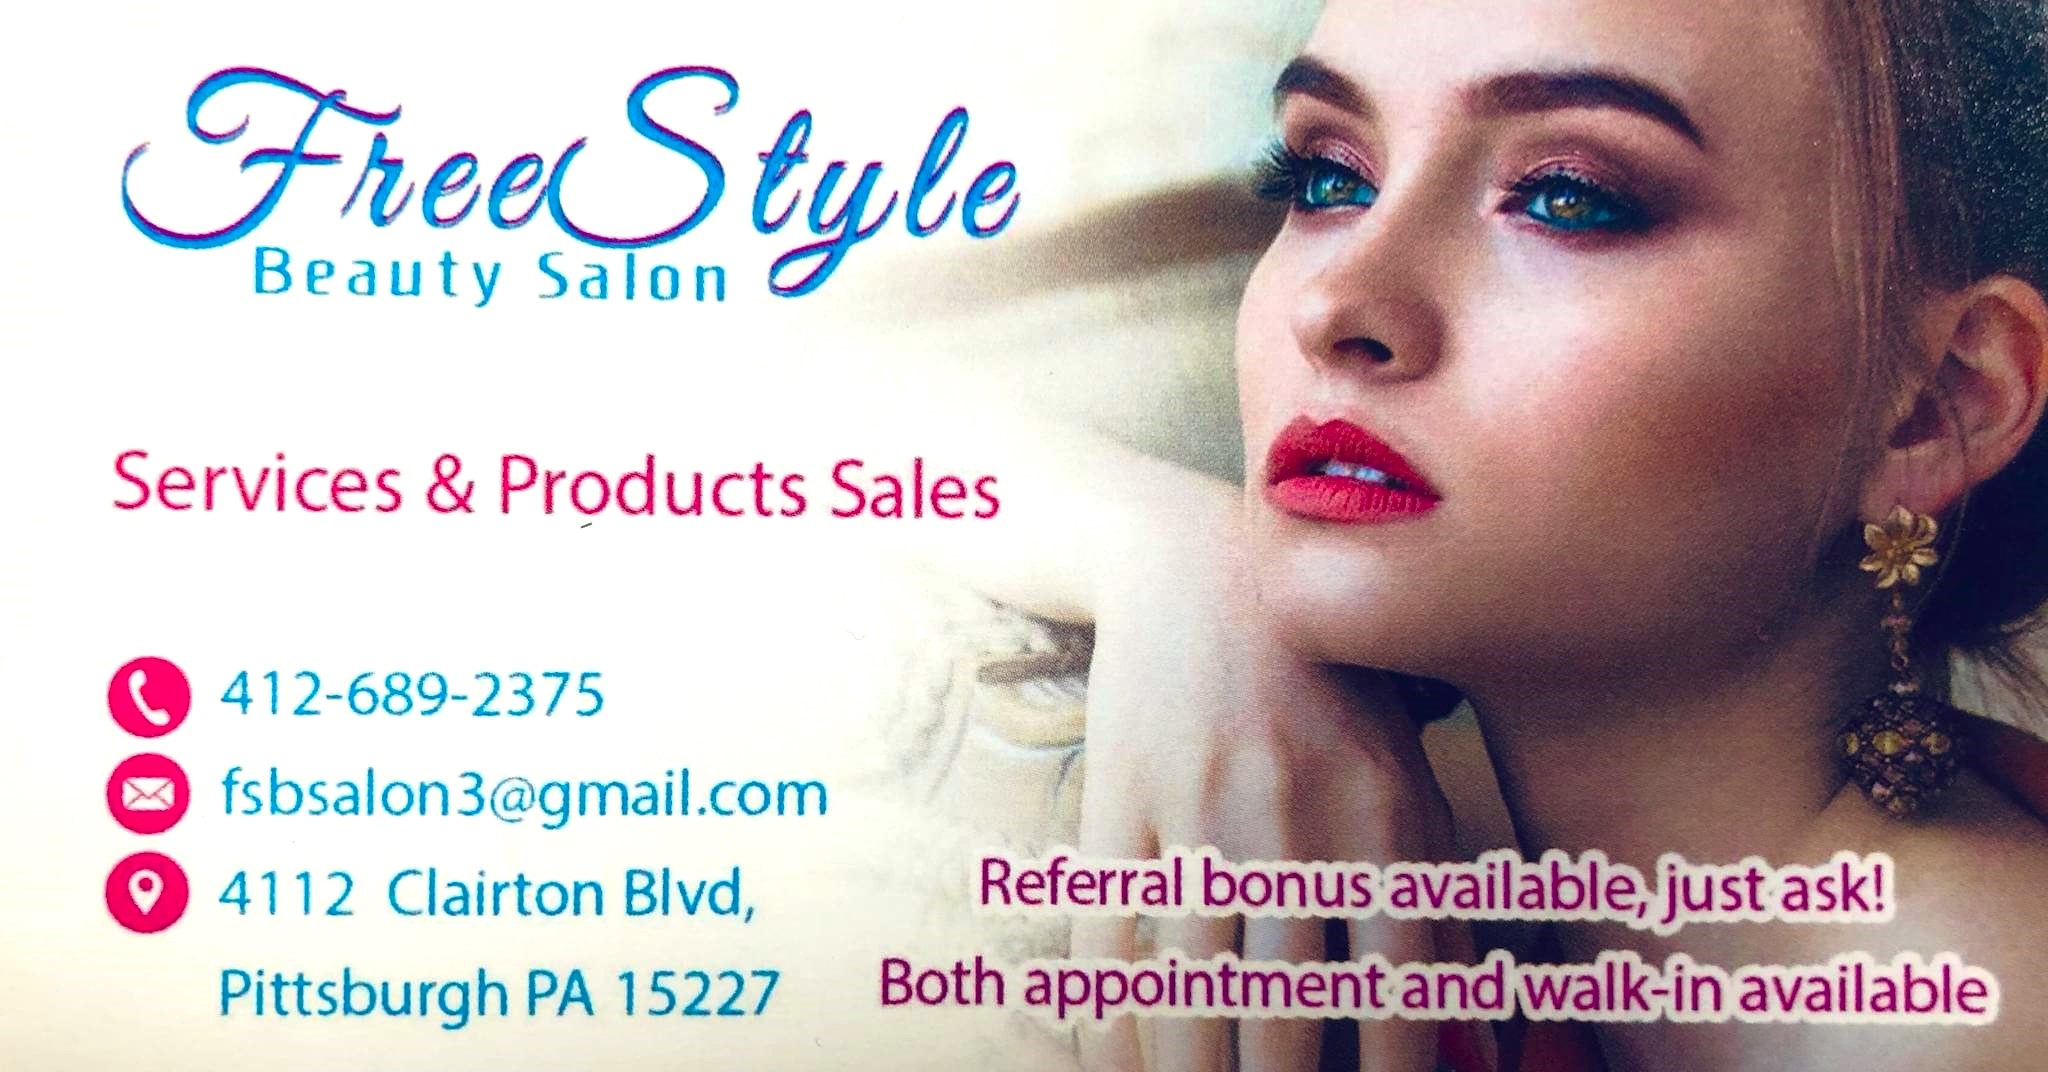 A graphic showing information about FreeStyle Beauty Salon.